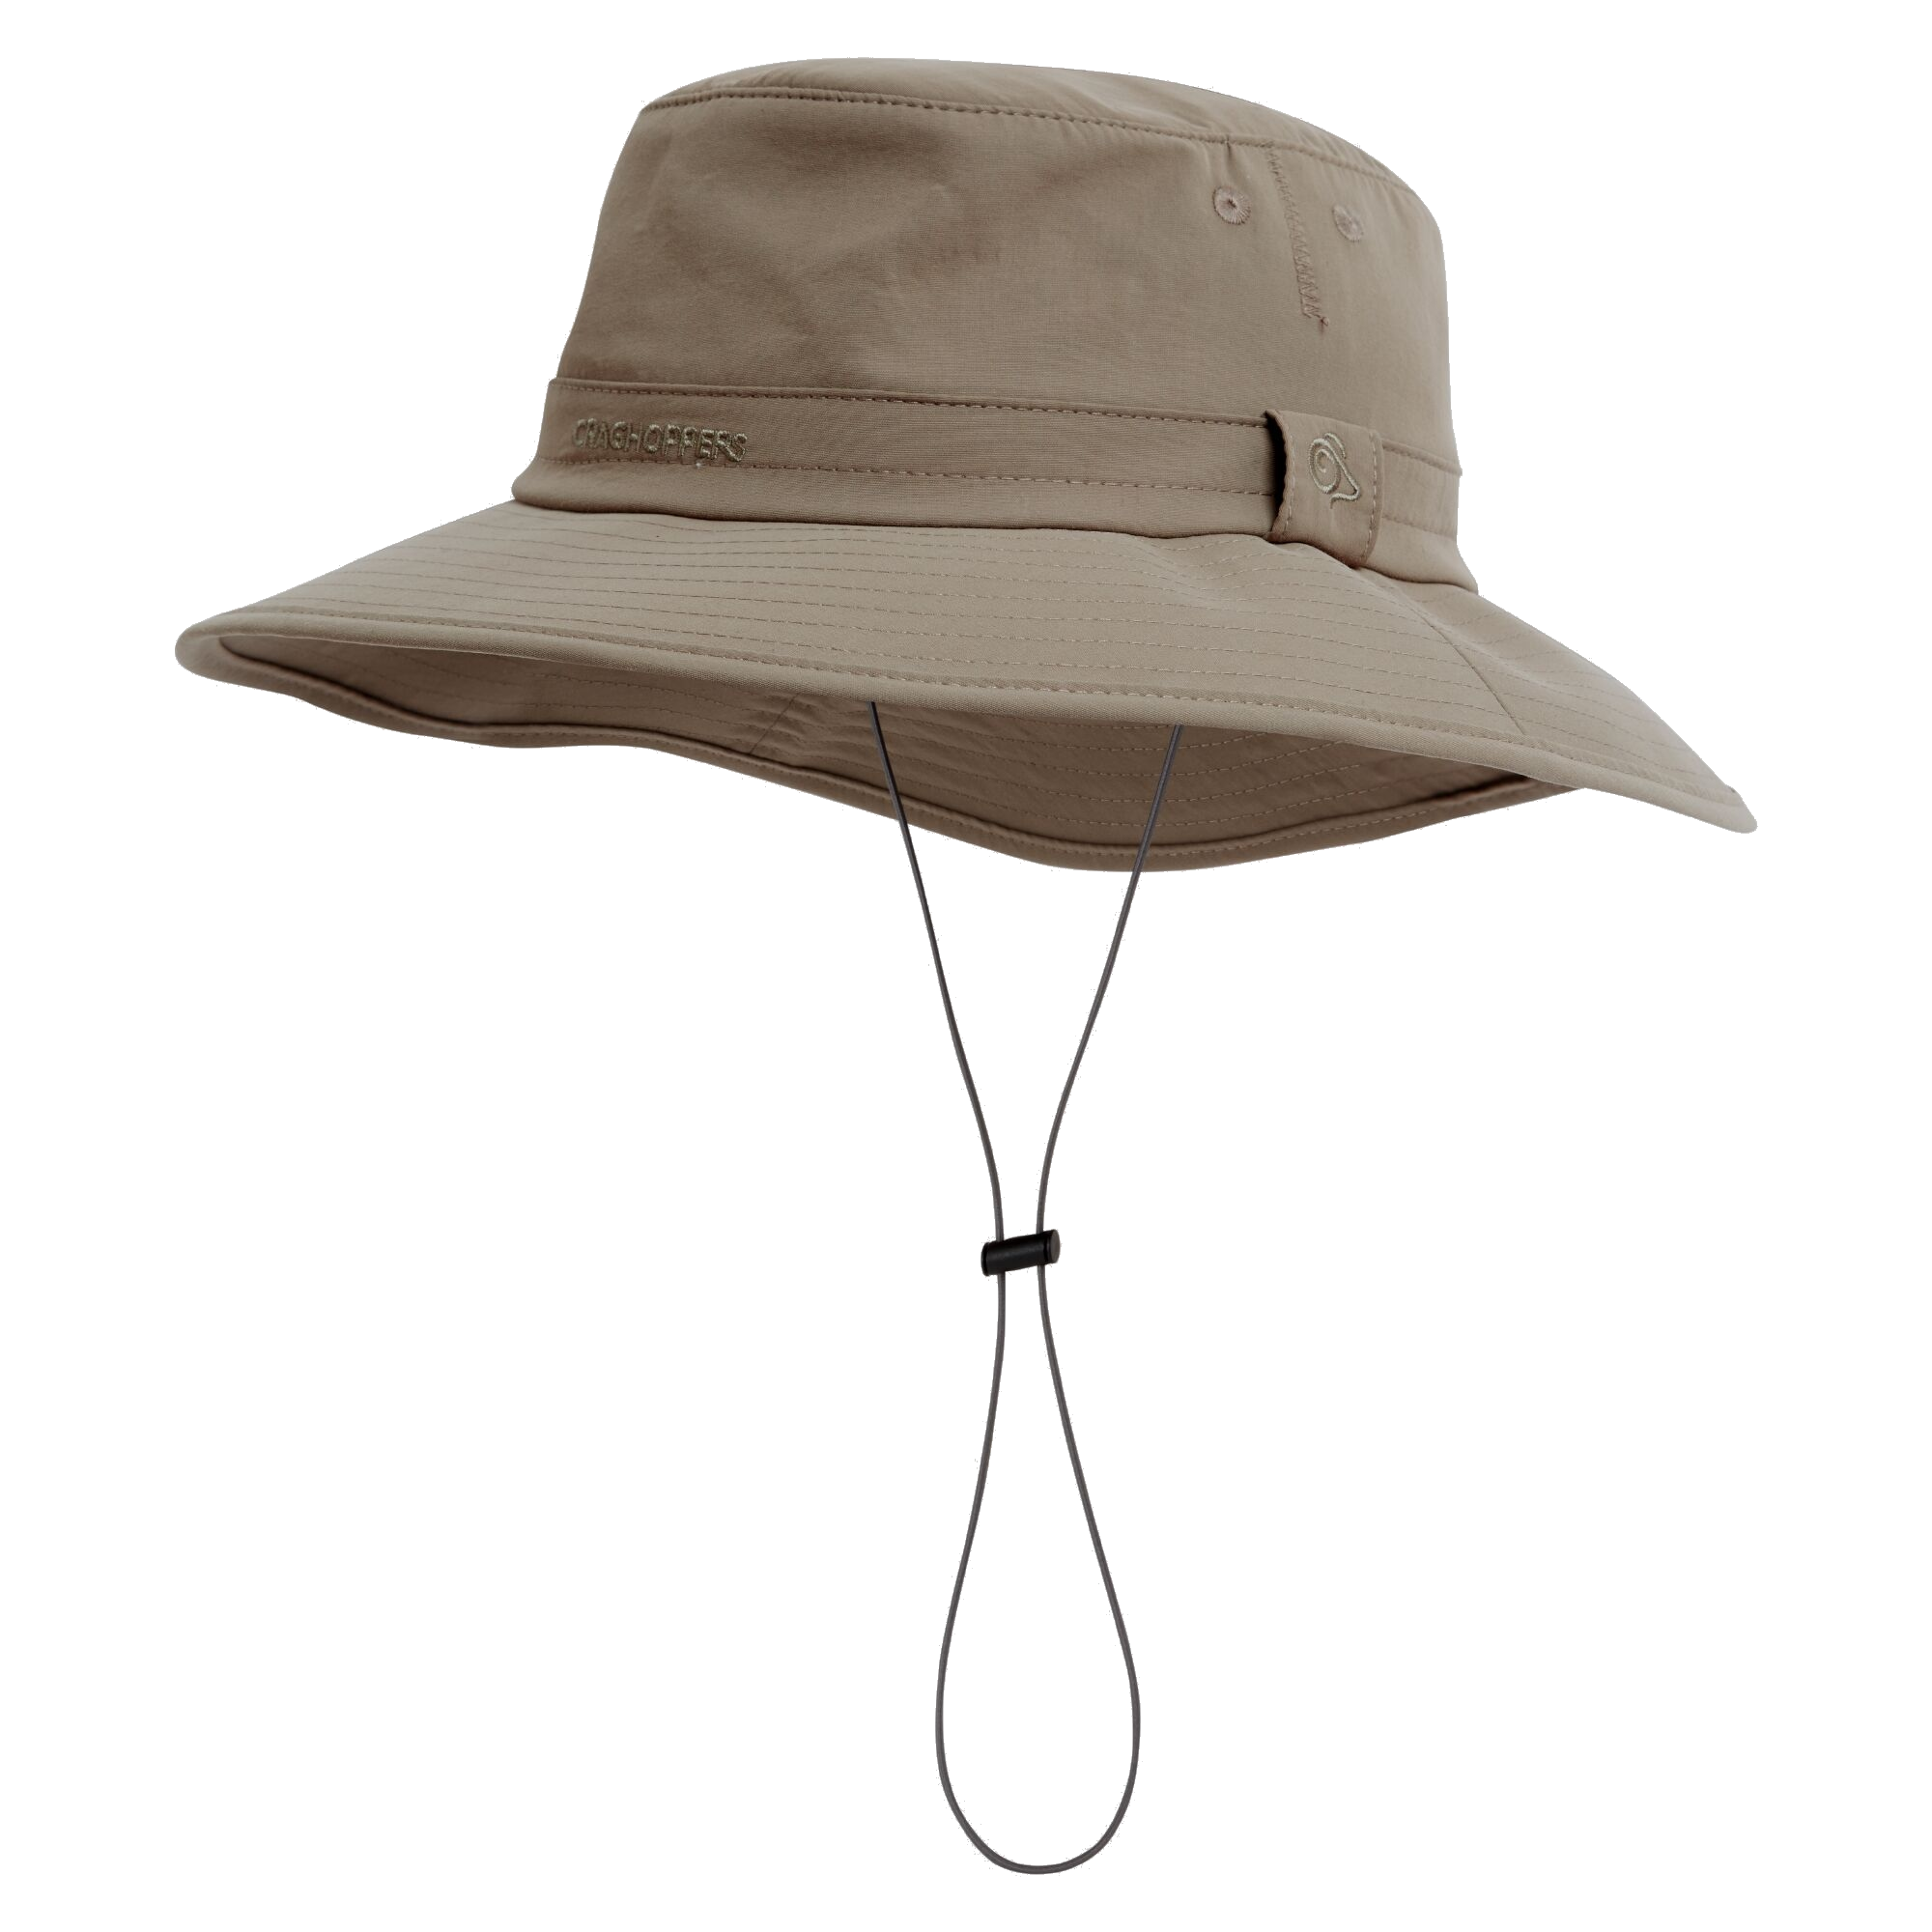 Craghoppers Men’s Nosilife Outback Hat II Pebble